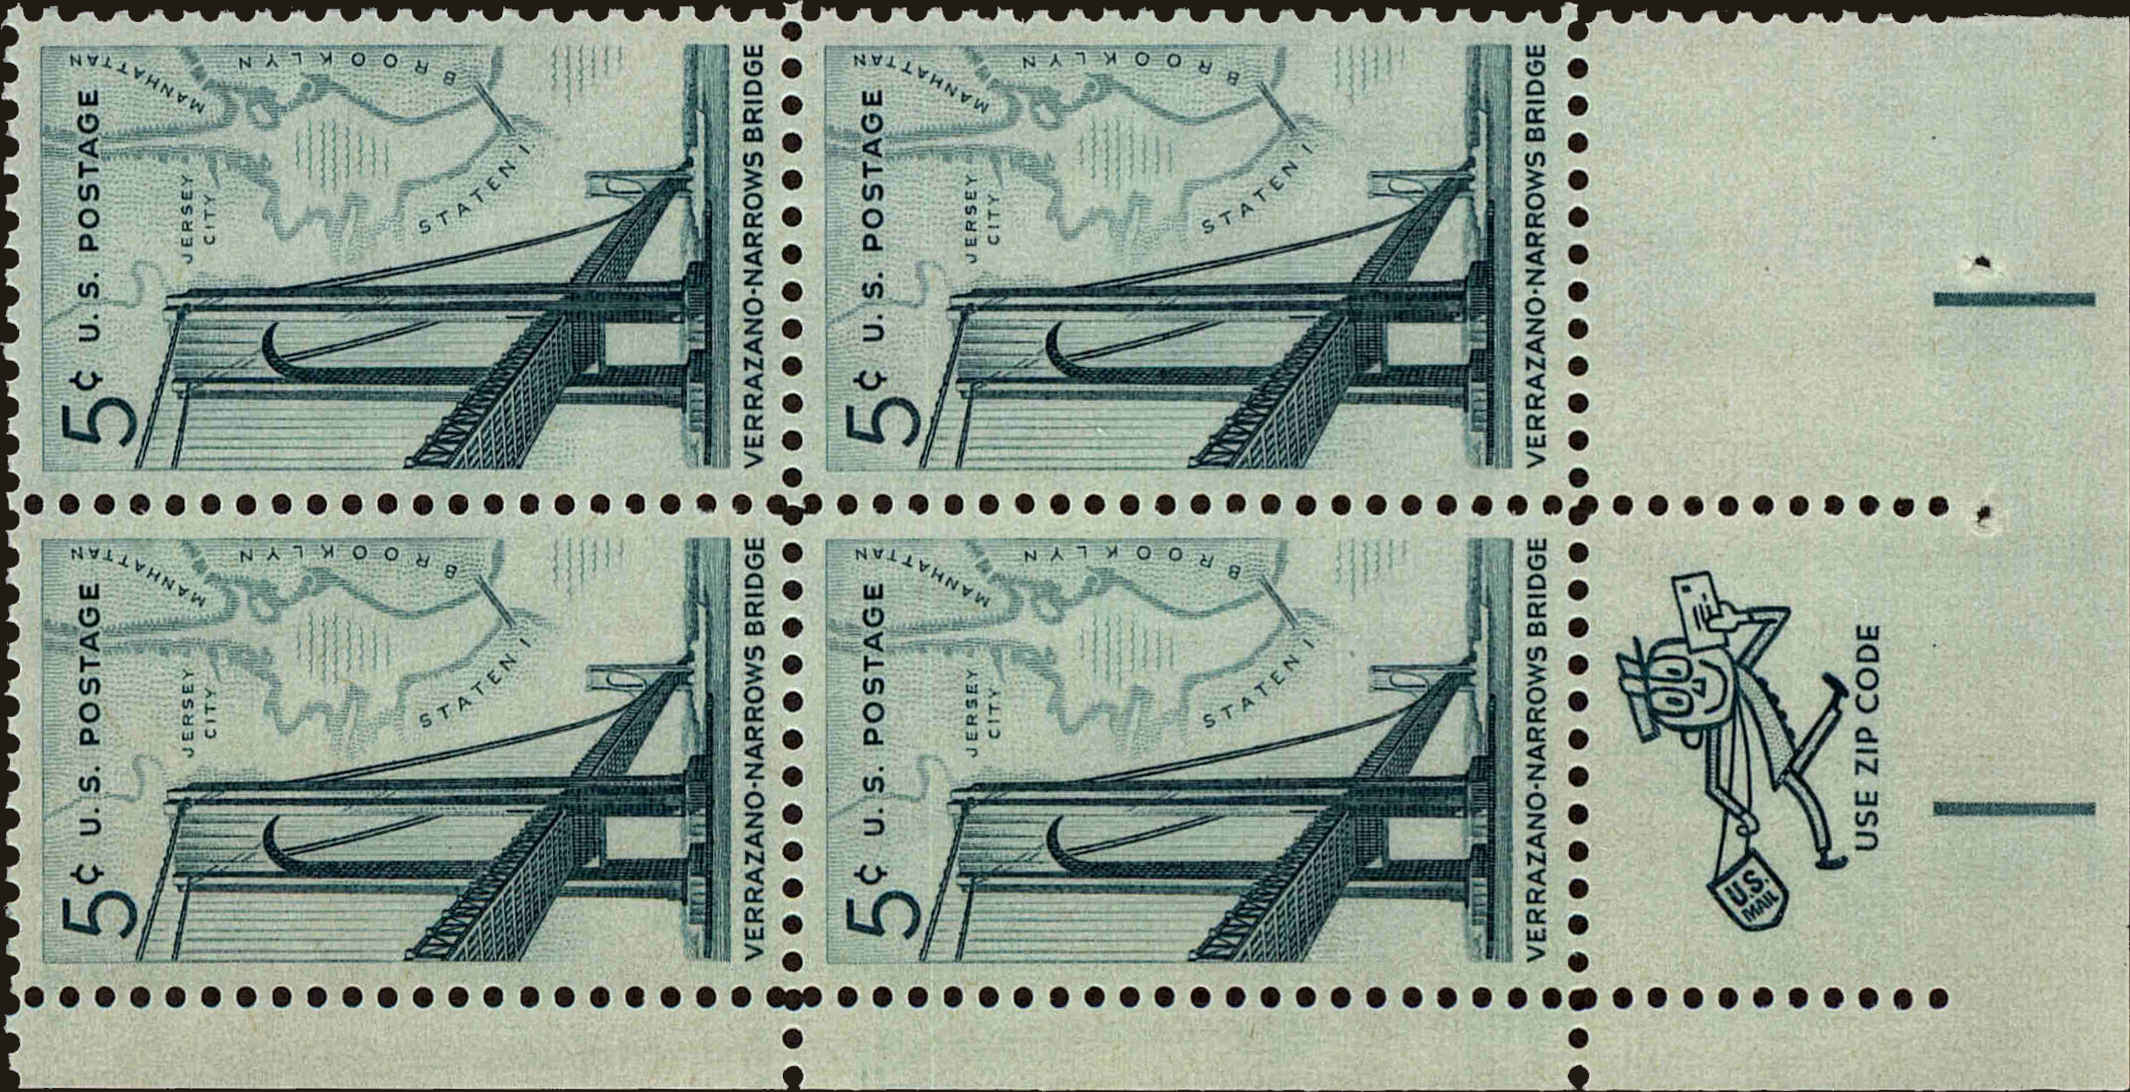 Front view of United States 1258 collectors stamp